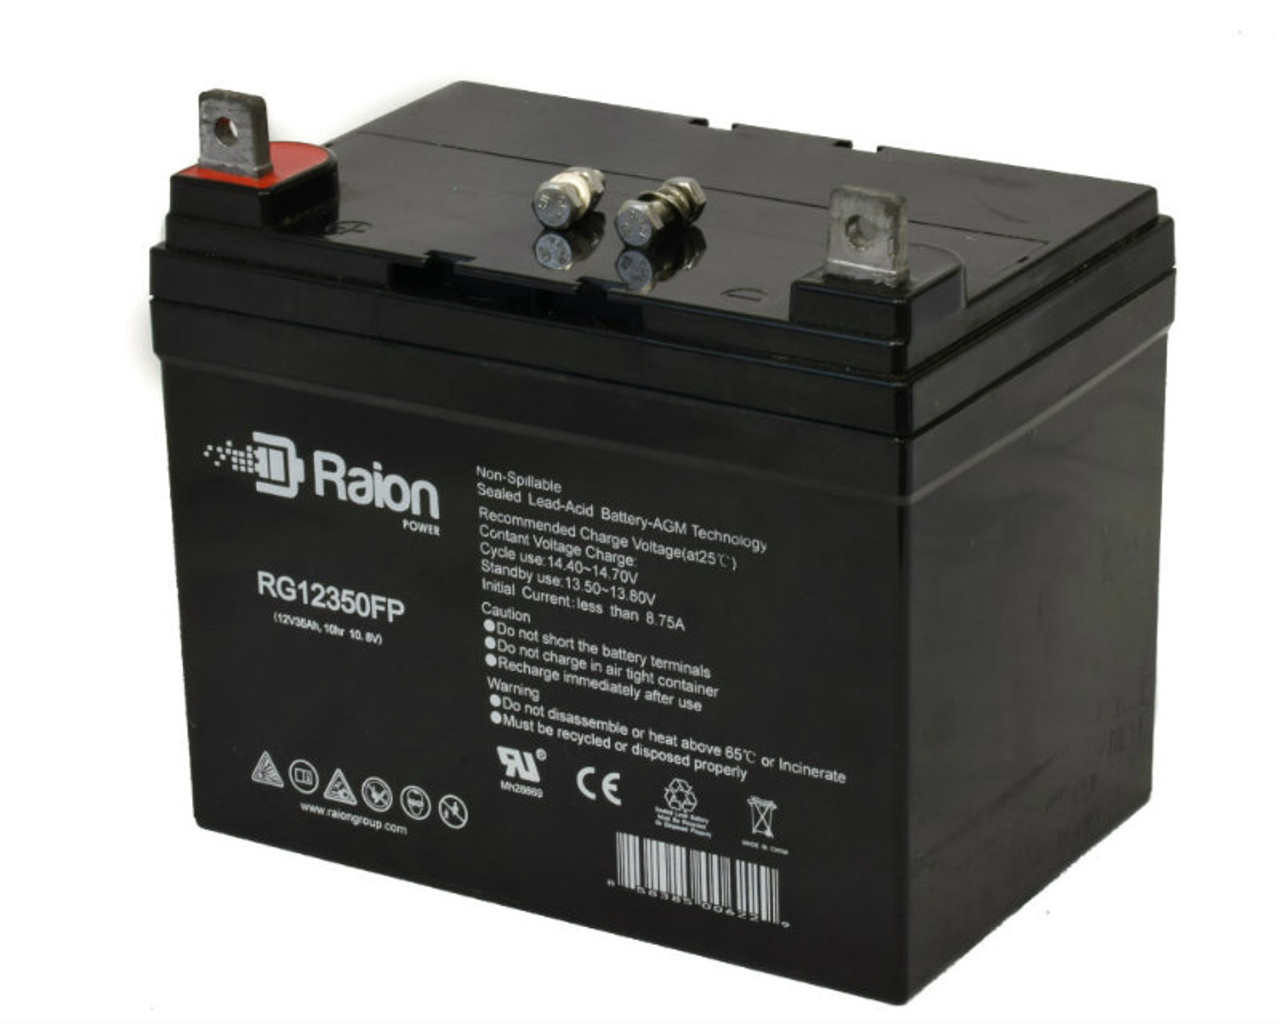 Raion Power Replacement 12V 35Ah RG12350FP Mobility Scooter Battery for Everest & Jennings Wheelchairs Sprint II